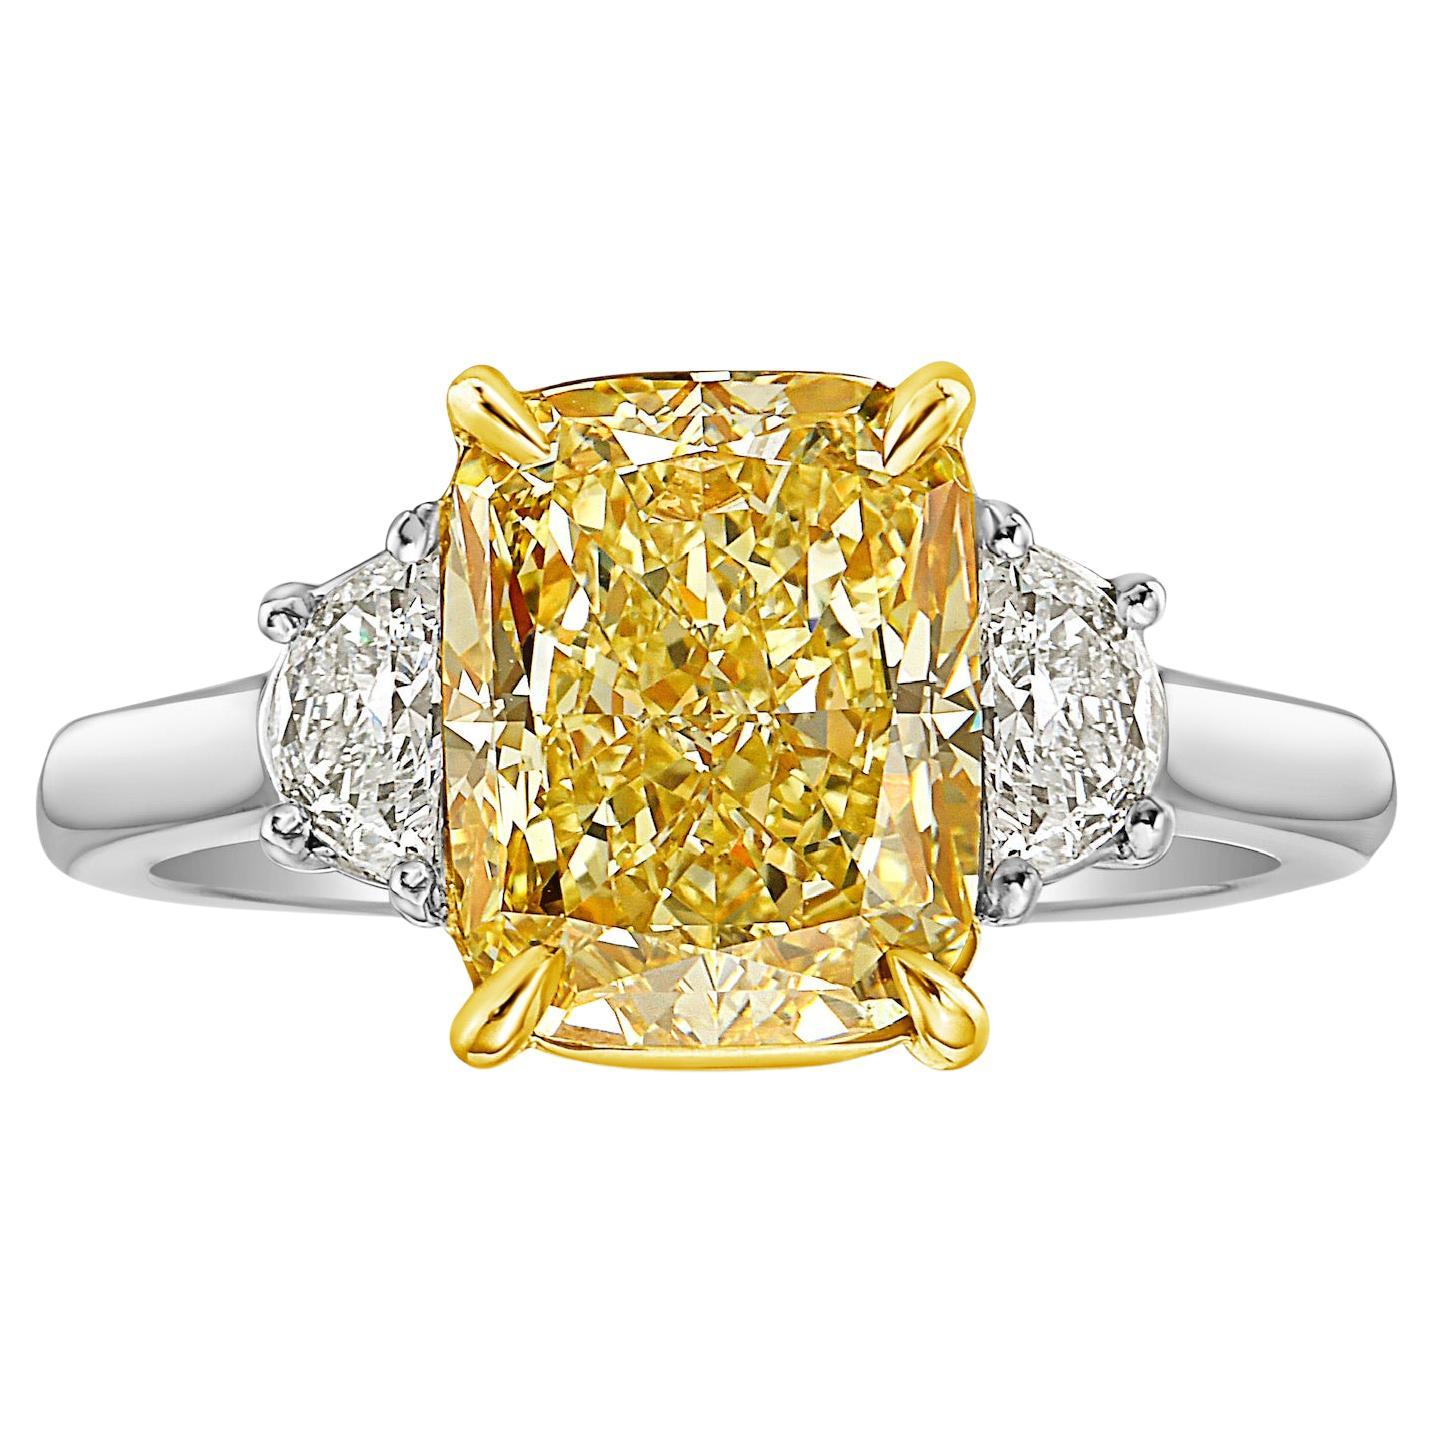 3.46ct Fancy Yellow Cushion Diamond Ring For Sale